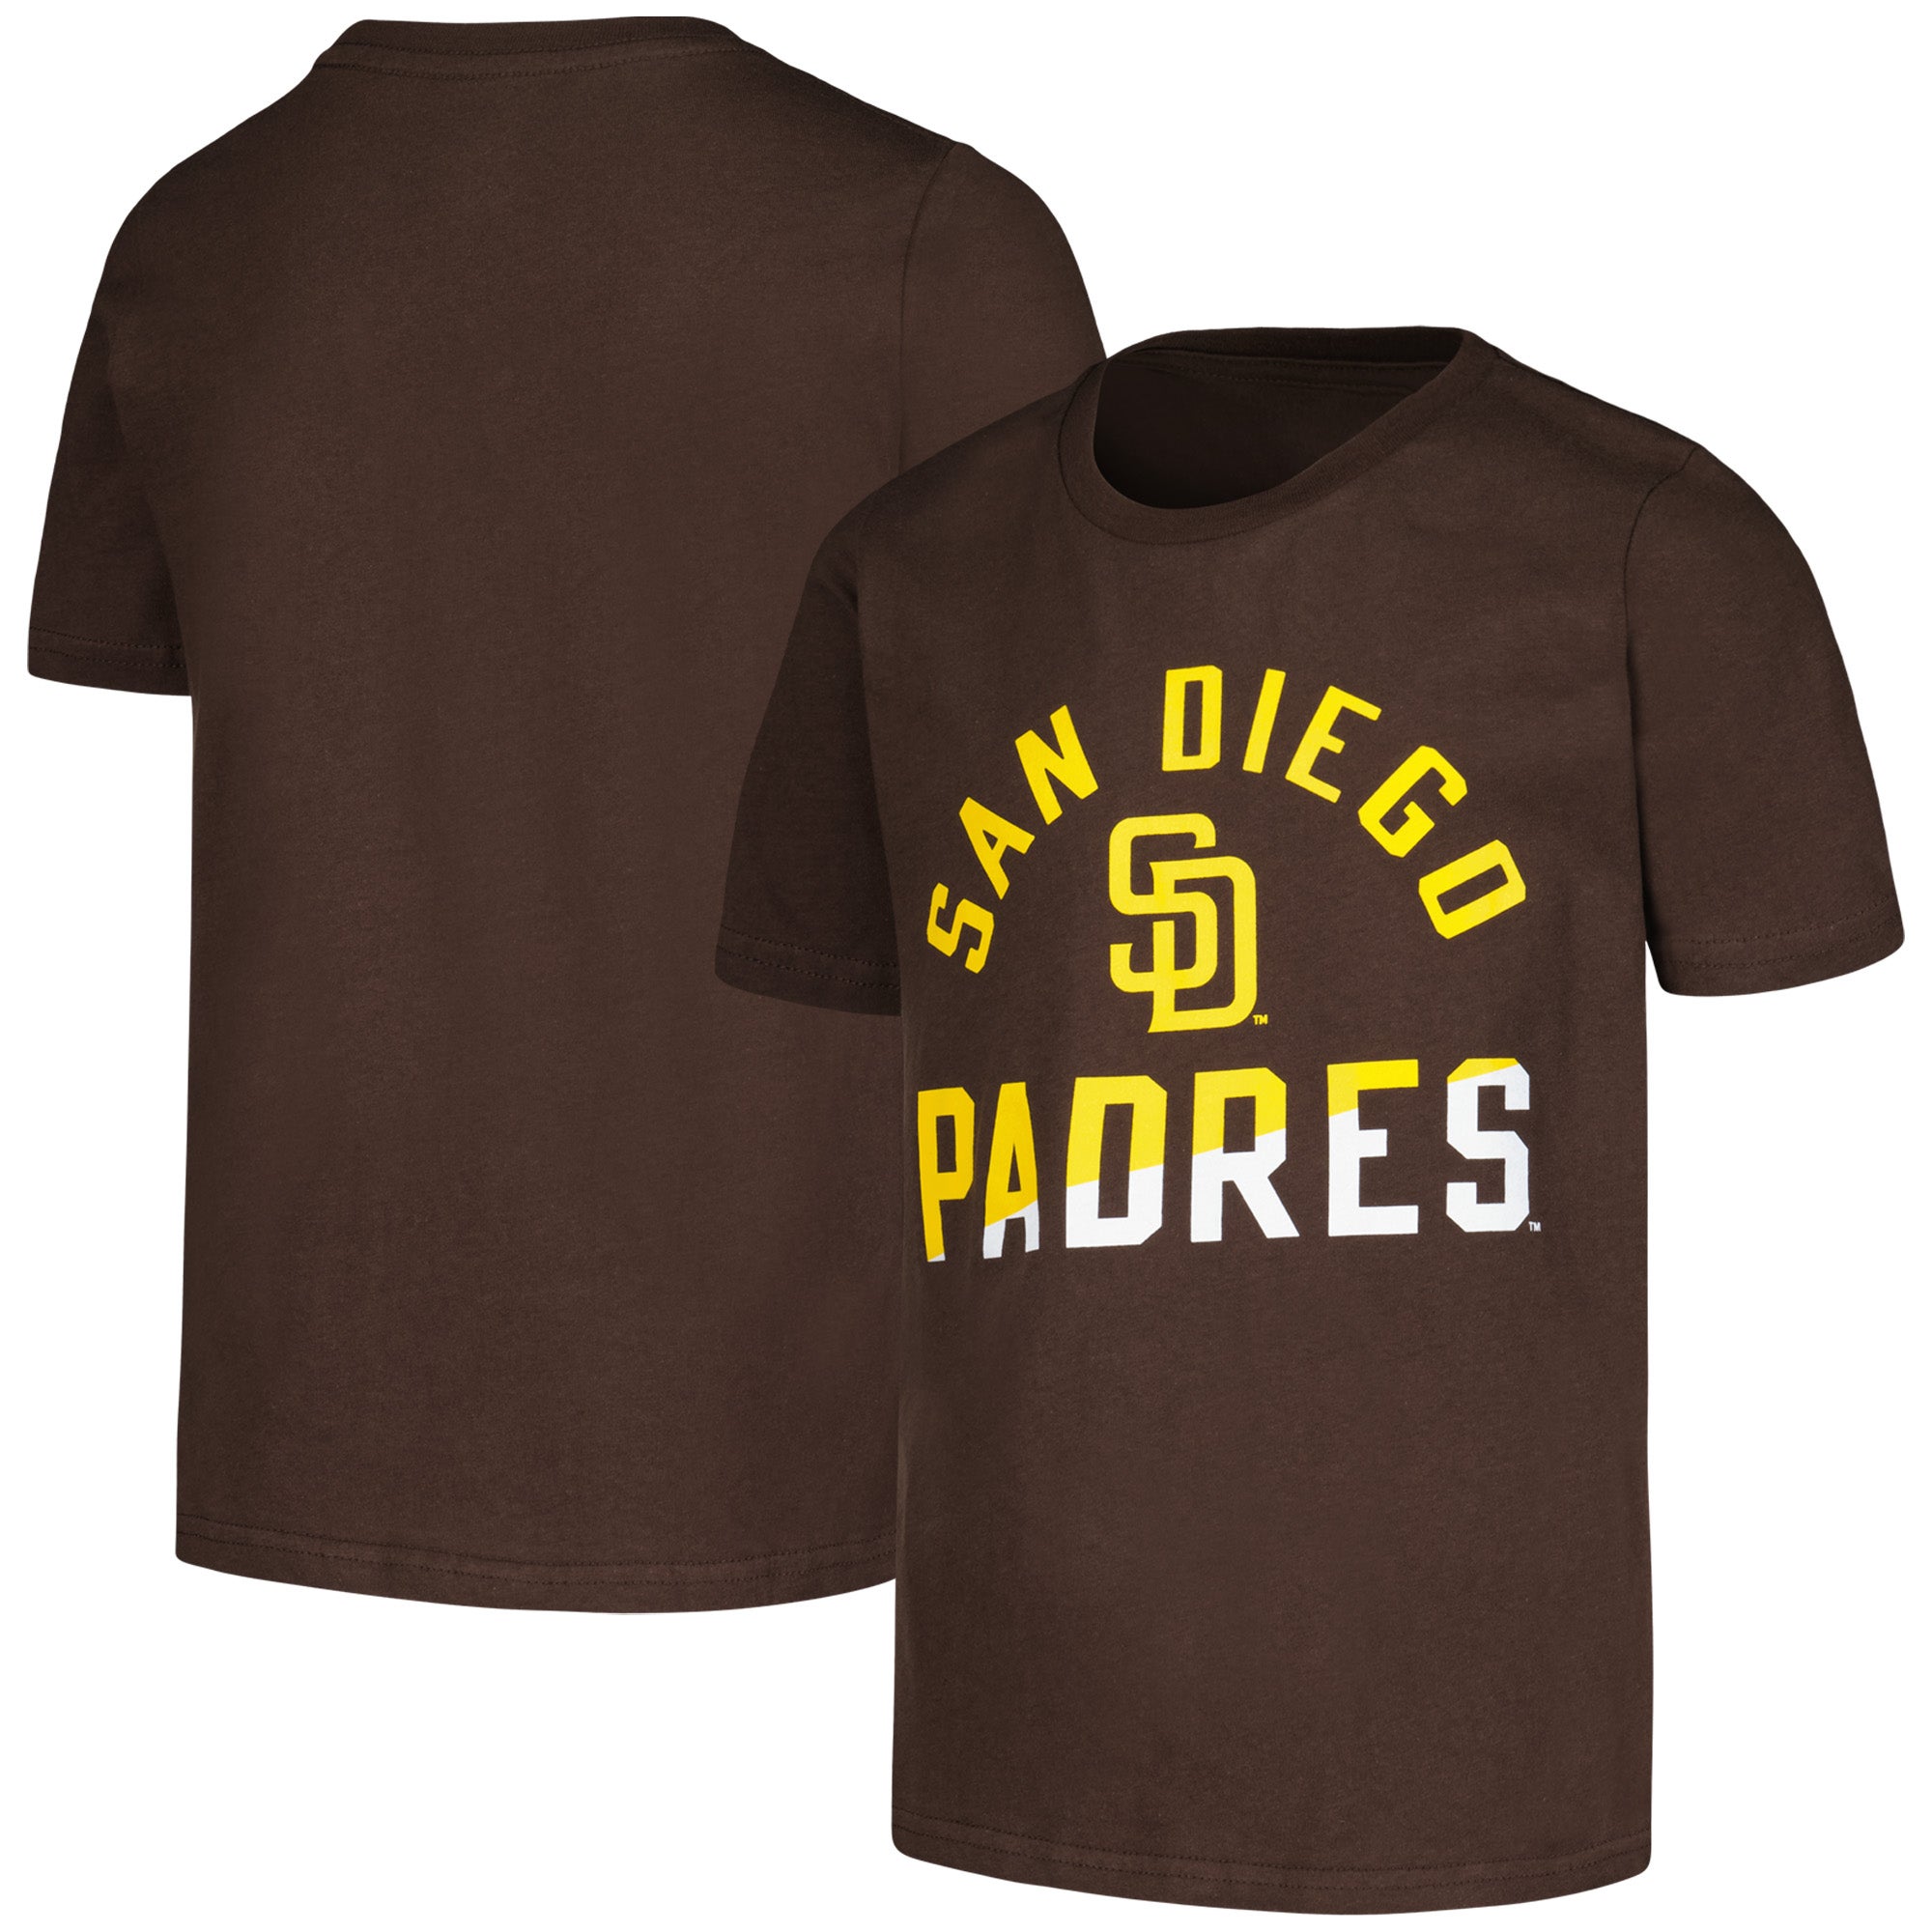 Outerstuff Youth Brown San Diego Padres Halftime T-Shirt Size: Extra Large